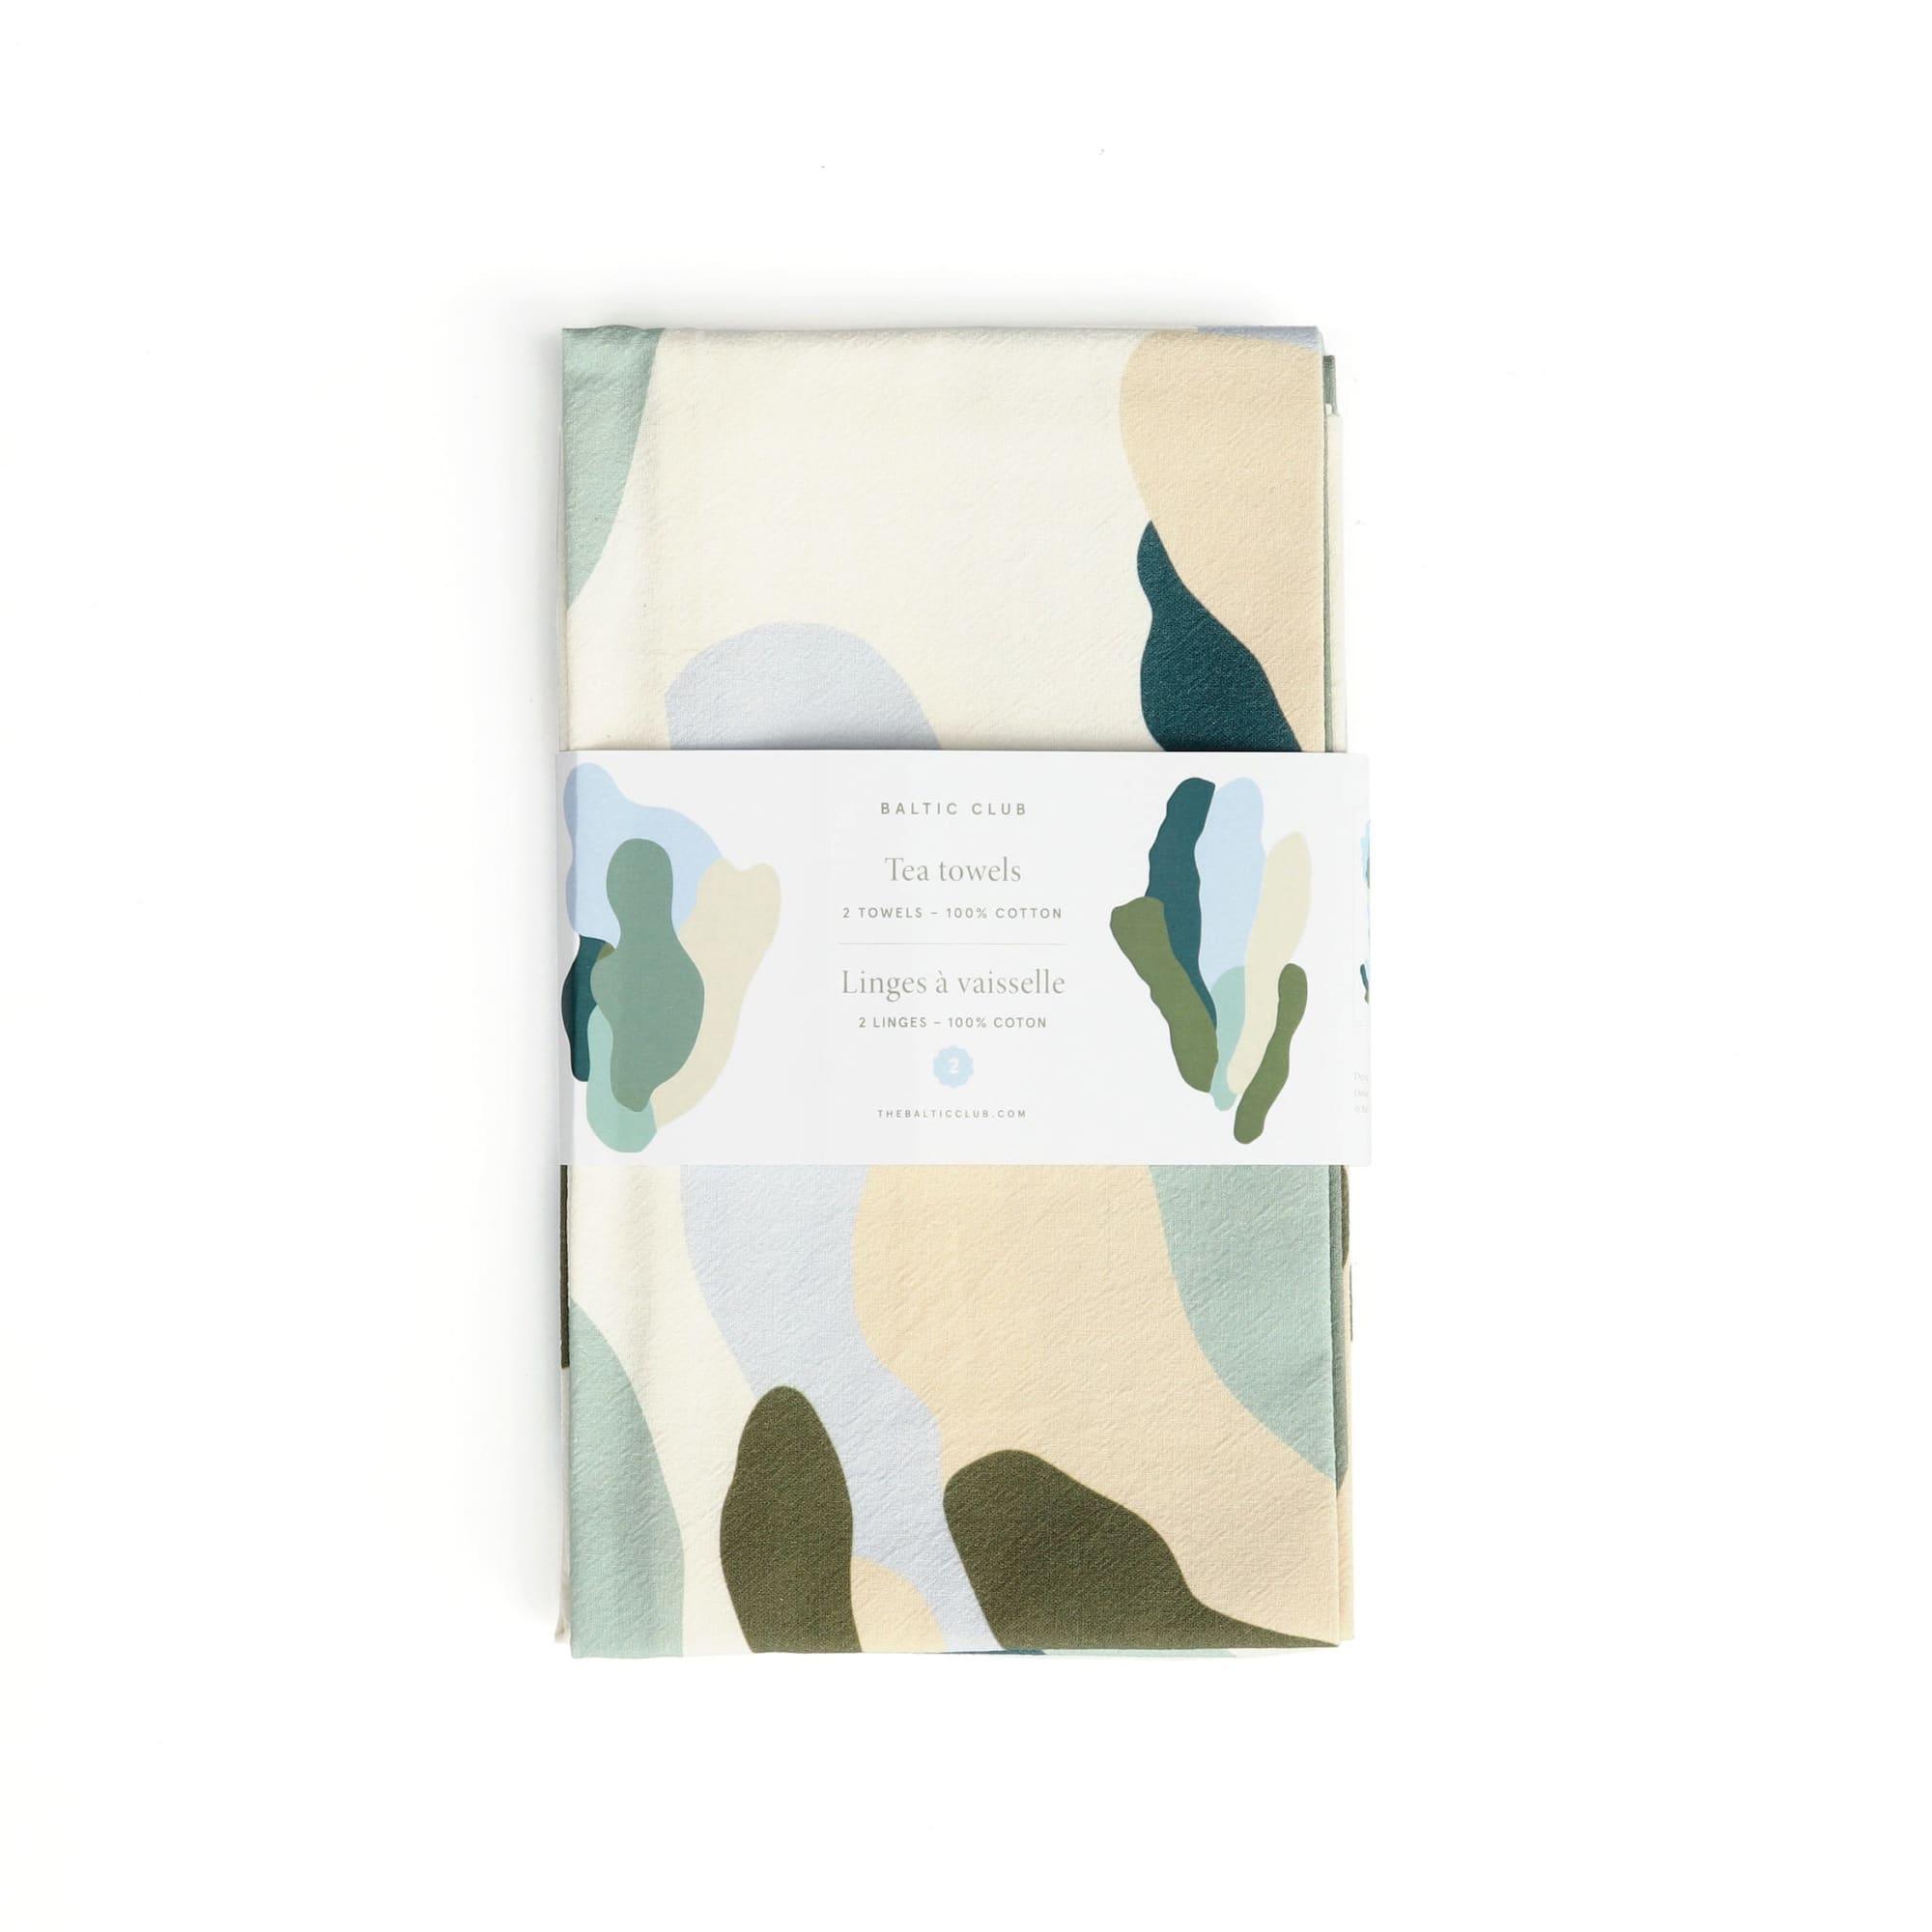 The set of two tea towels featuring the Moss illustrations with its packaging.